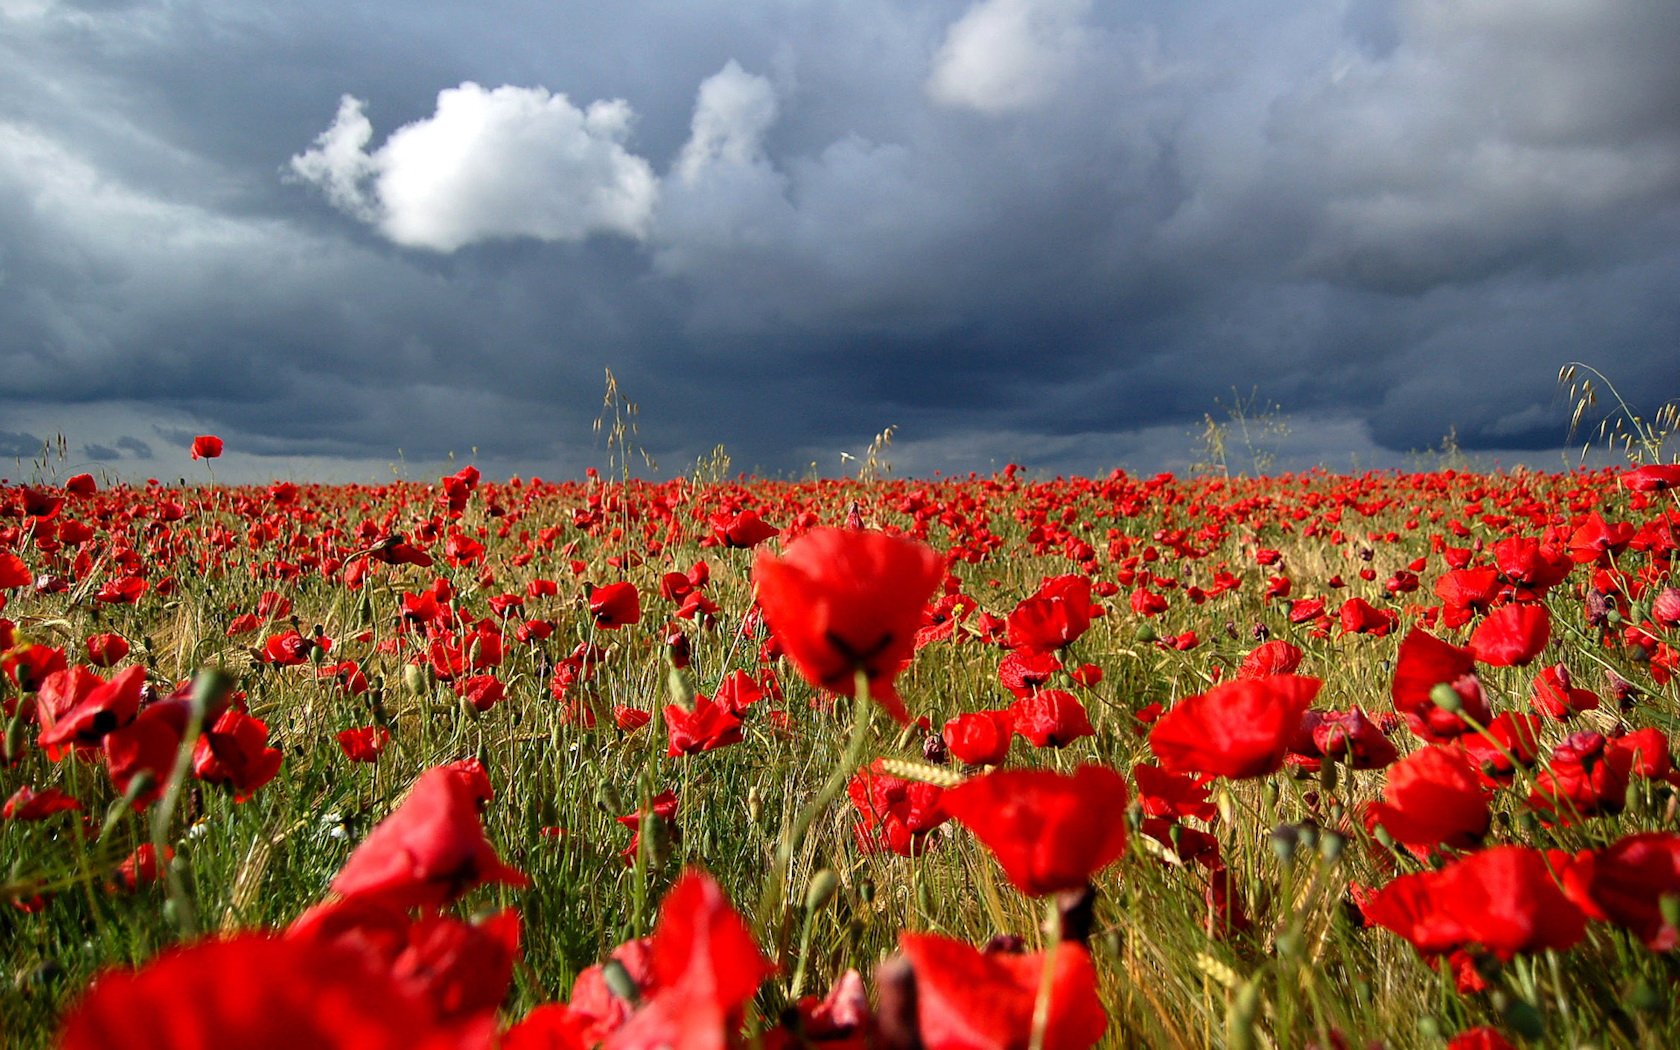 Field of red maquis before a thunderstorm wallpaper - Flower